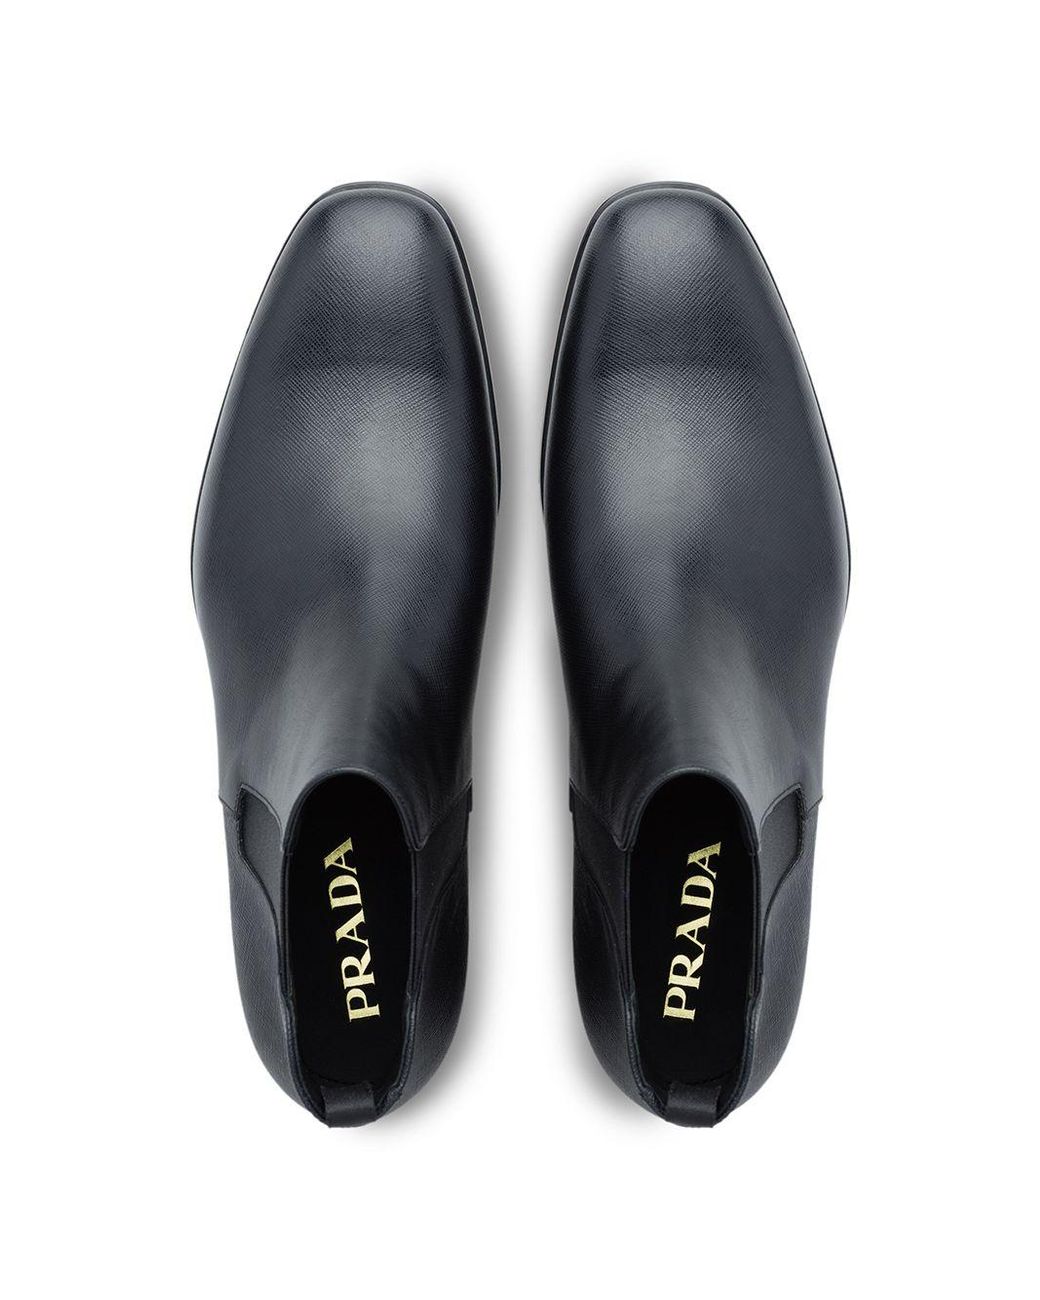 Prada Leather Brushed Chelsea Boots in Nero (Black) for Men 